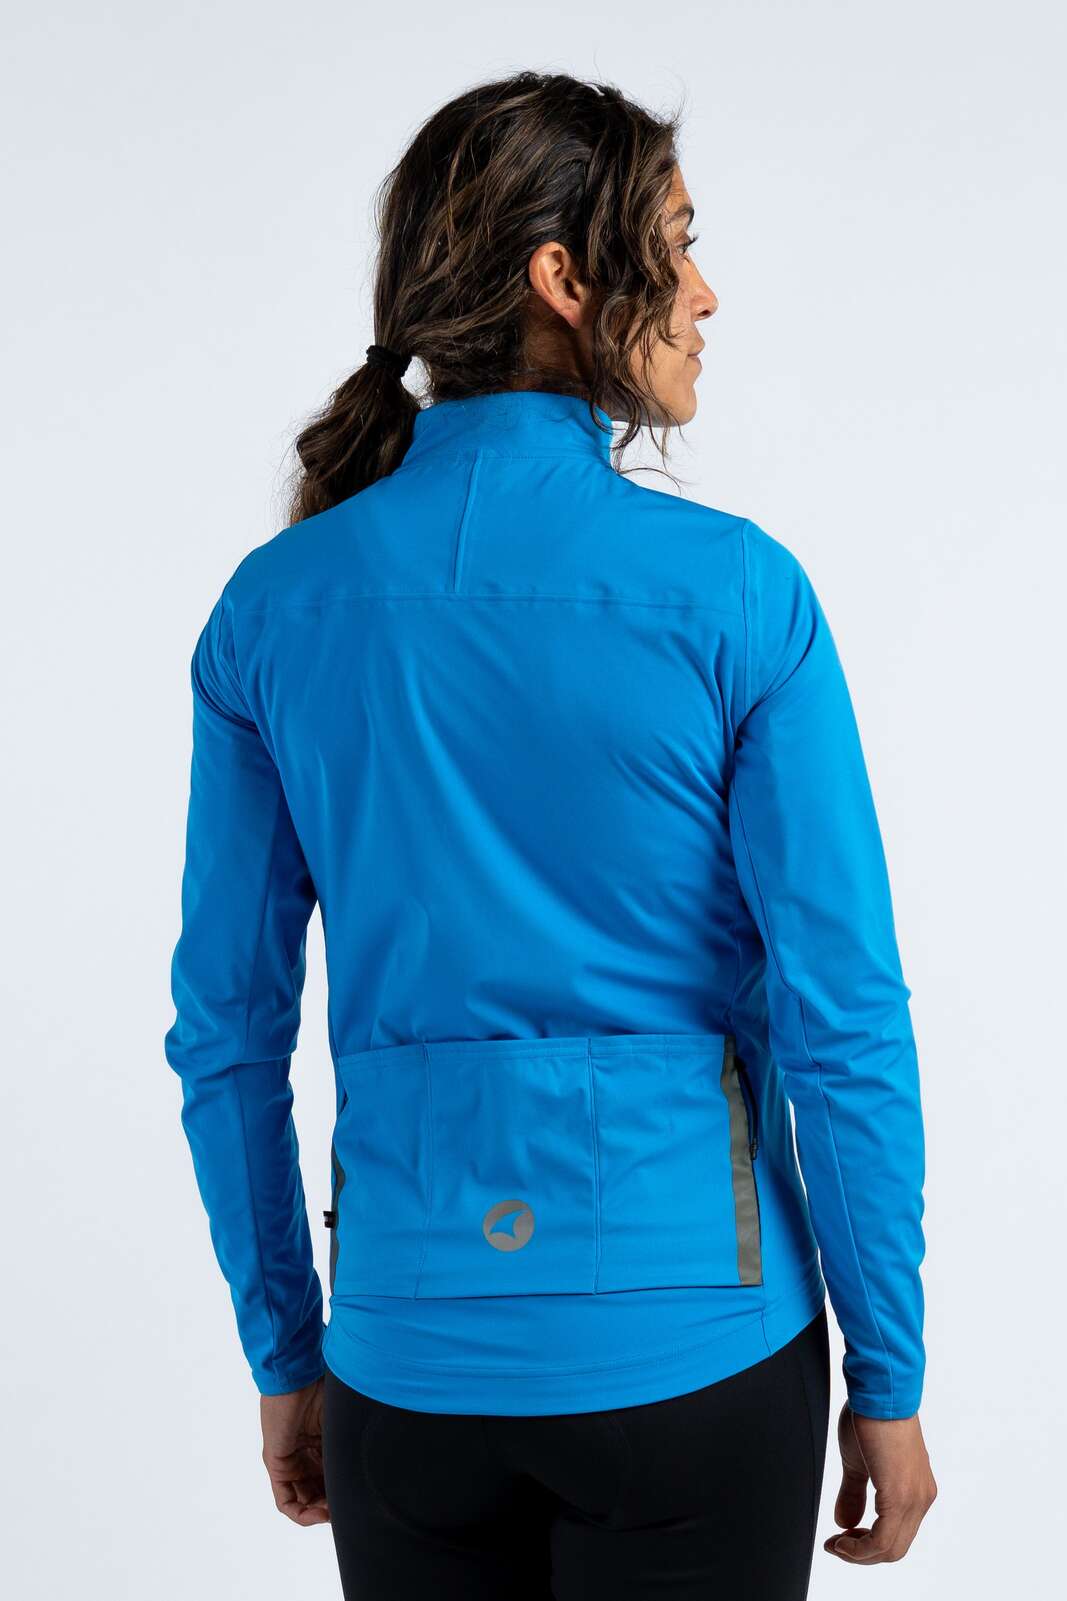 Womens Blue Cycling Jacket for Cold Wet Weather - Back View 